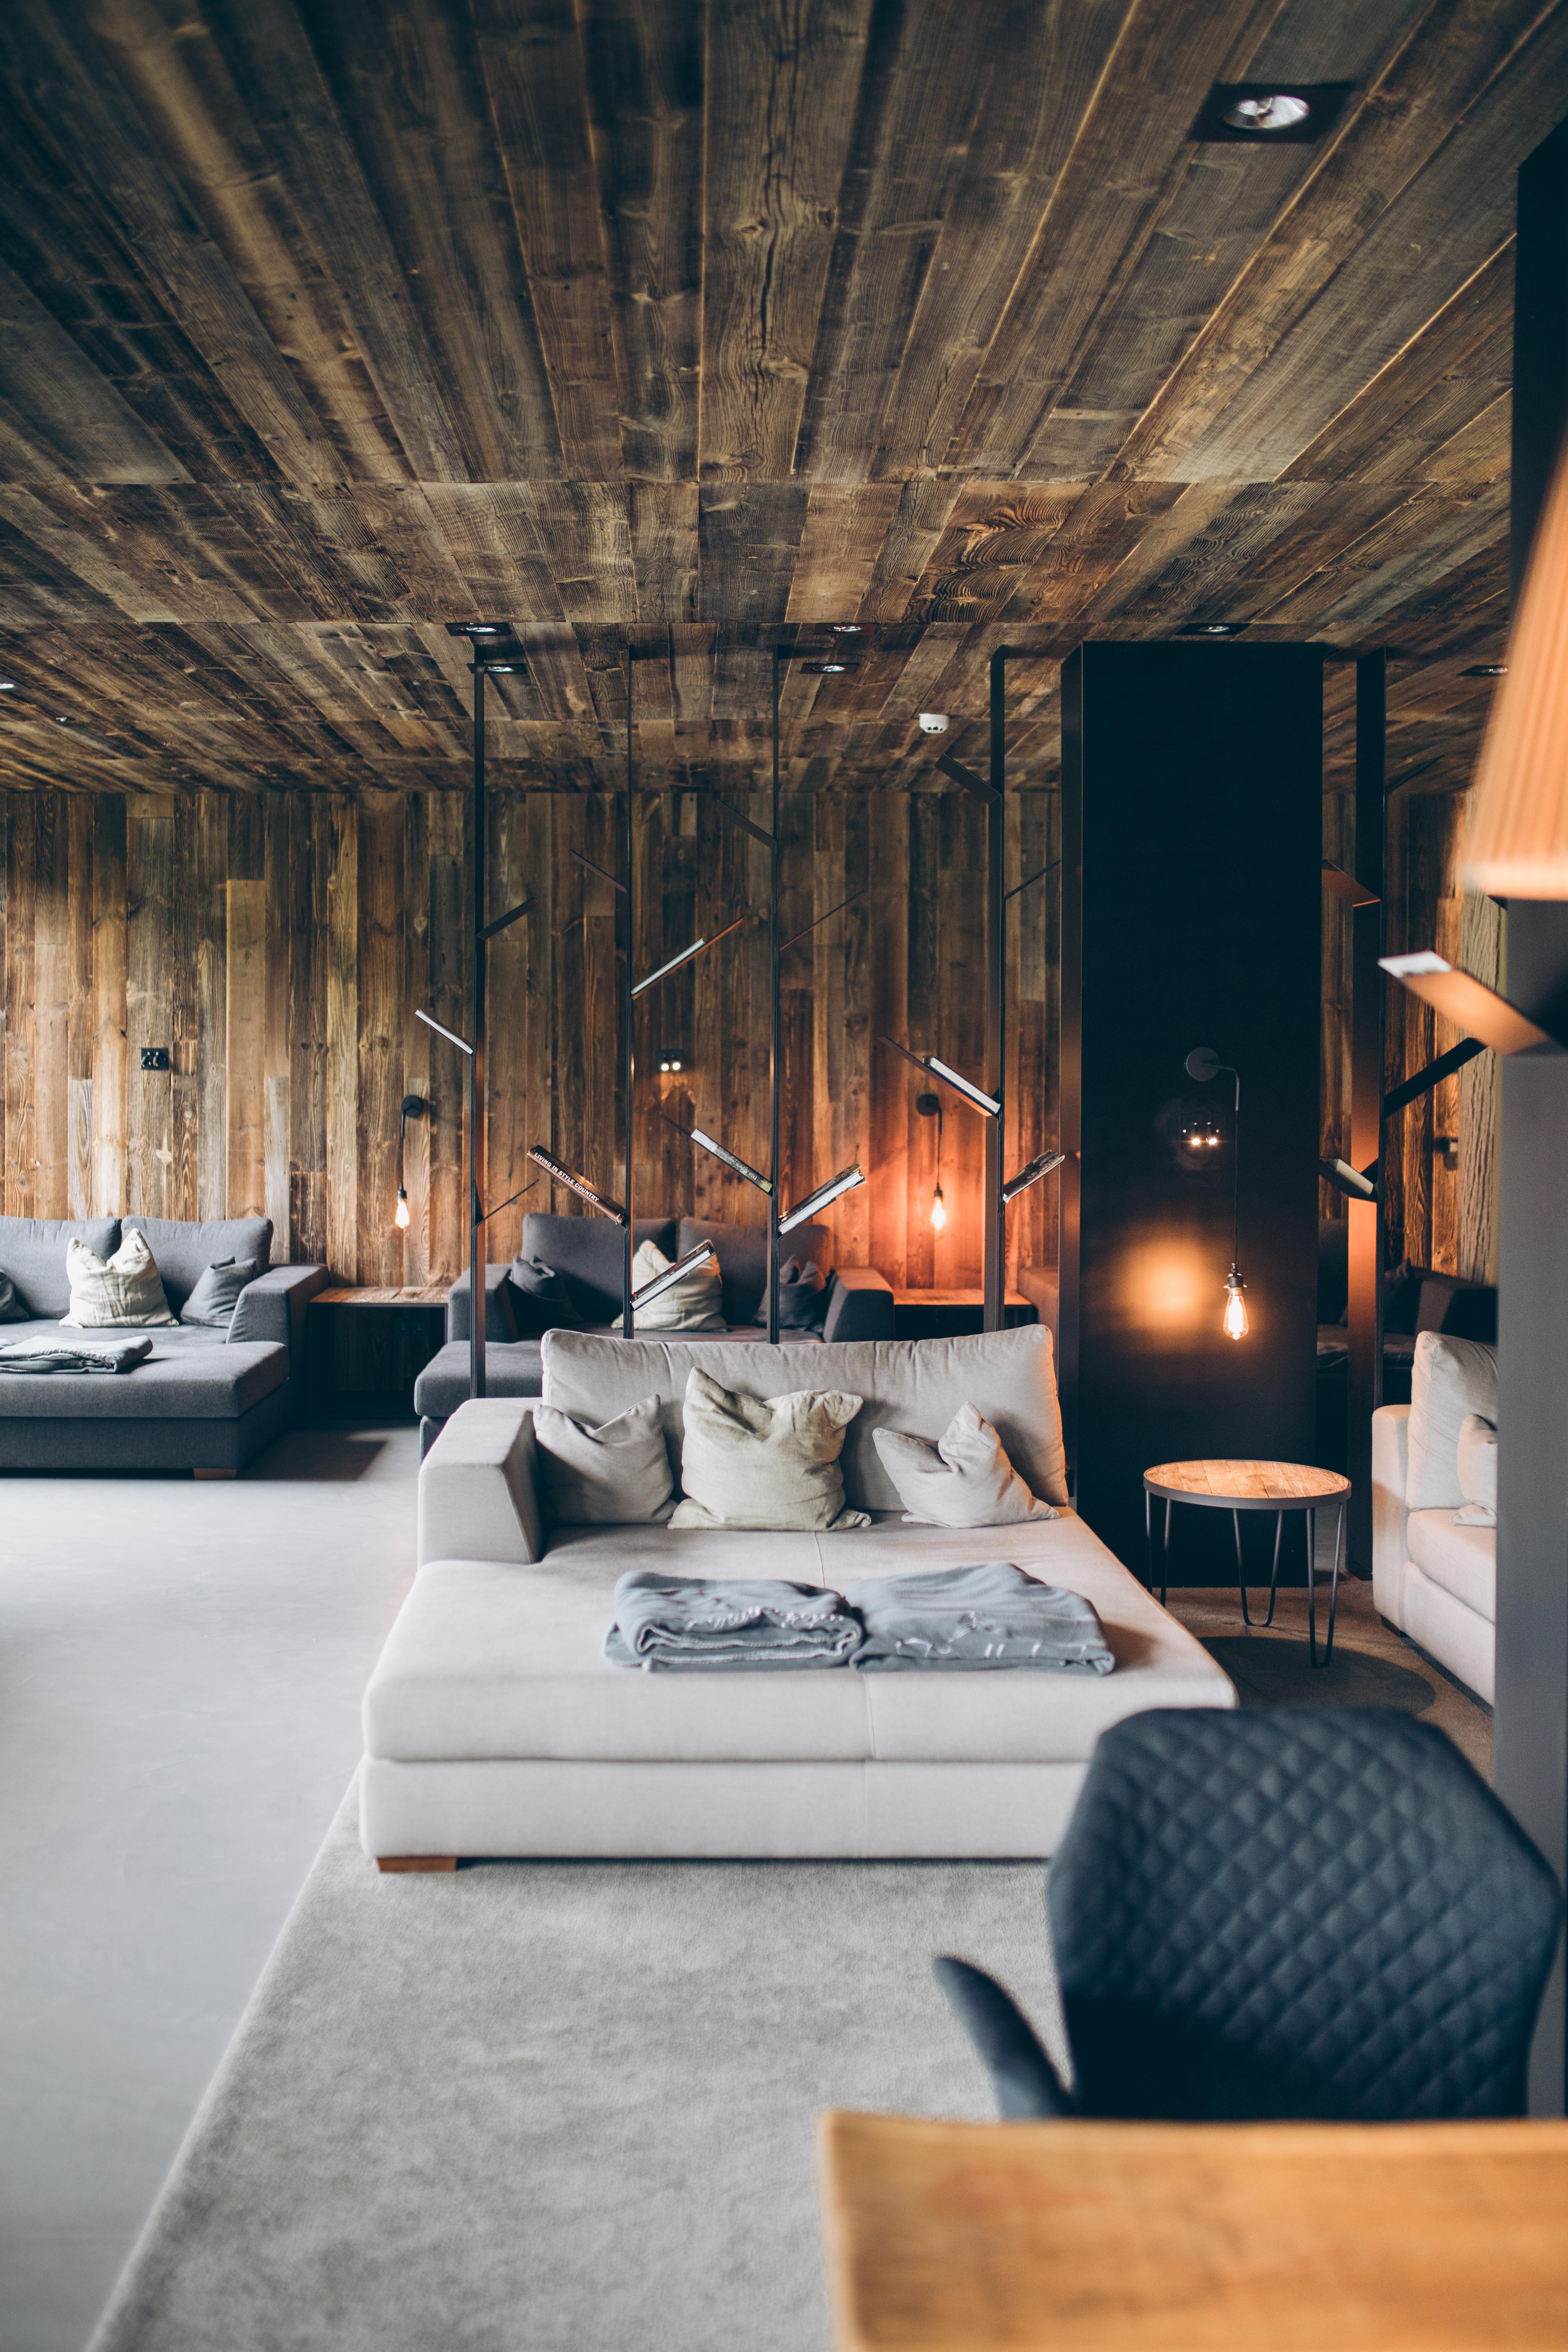 Home Away From Home: Naturhotel Forsthofgut | You rock my life